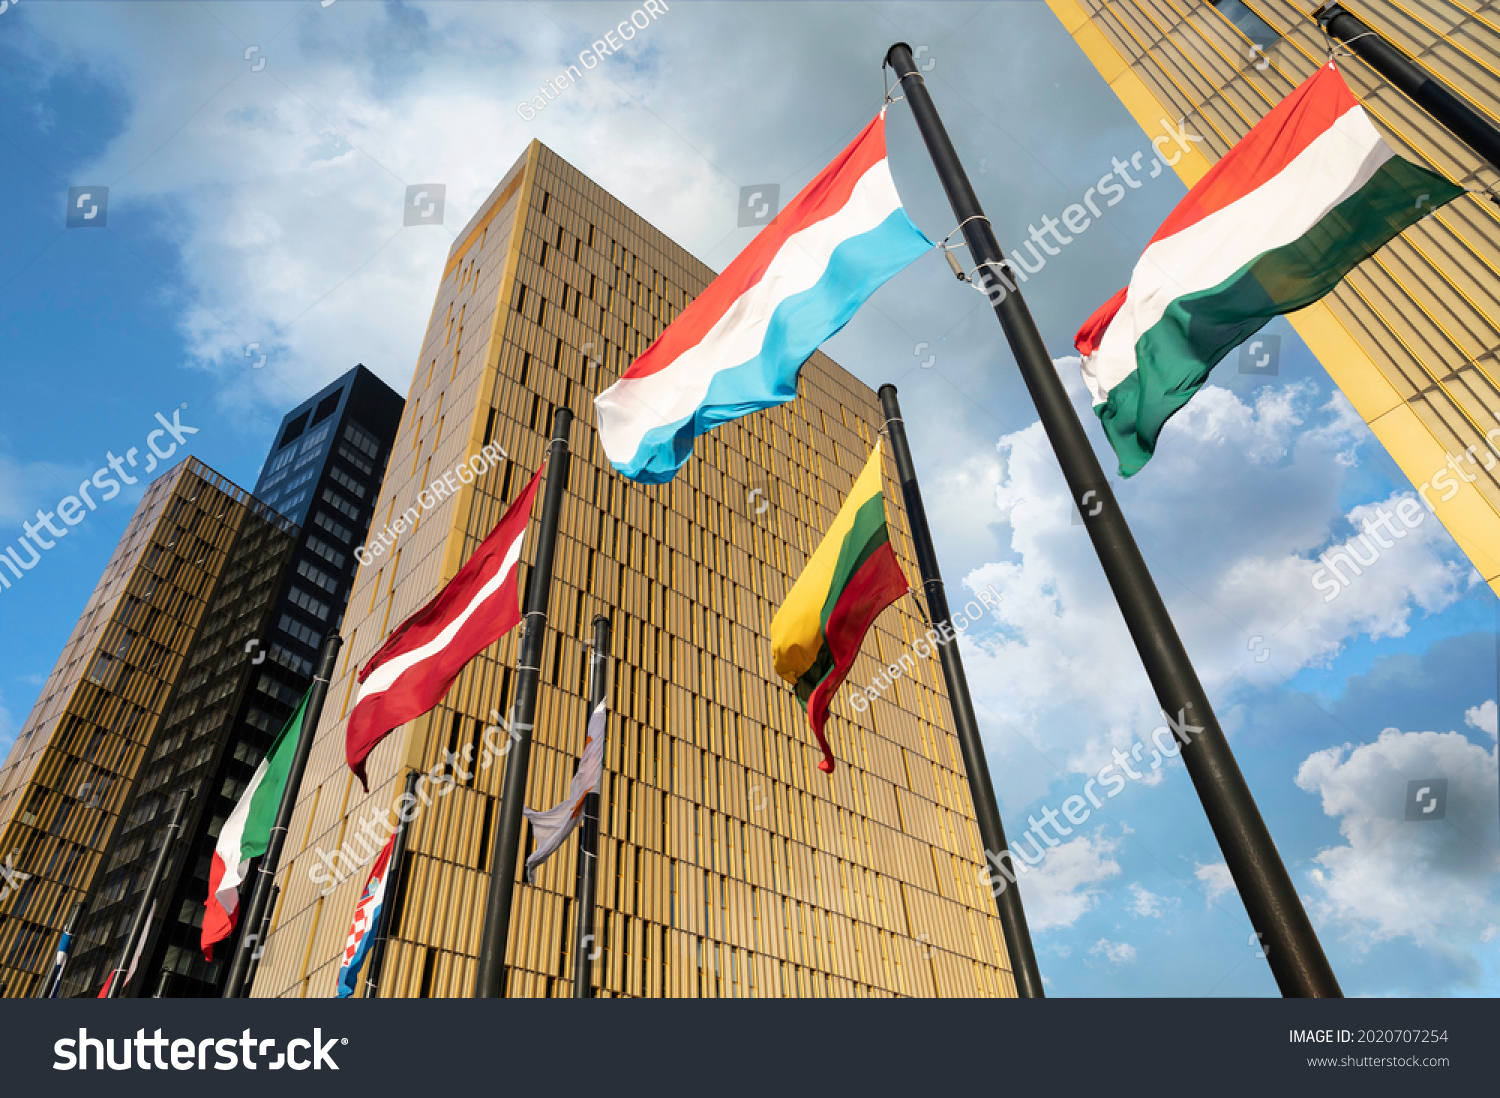 European Flags flapping in the wind, in front of European Union Court of Justice building in Luxembourg Kirchberg. Flags of Luxembourg, Hungary, Lithuania, Austria... #2020707254